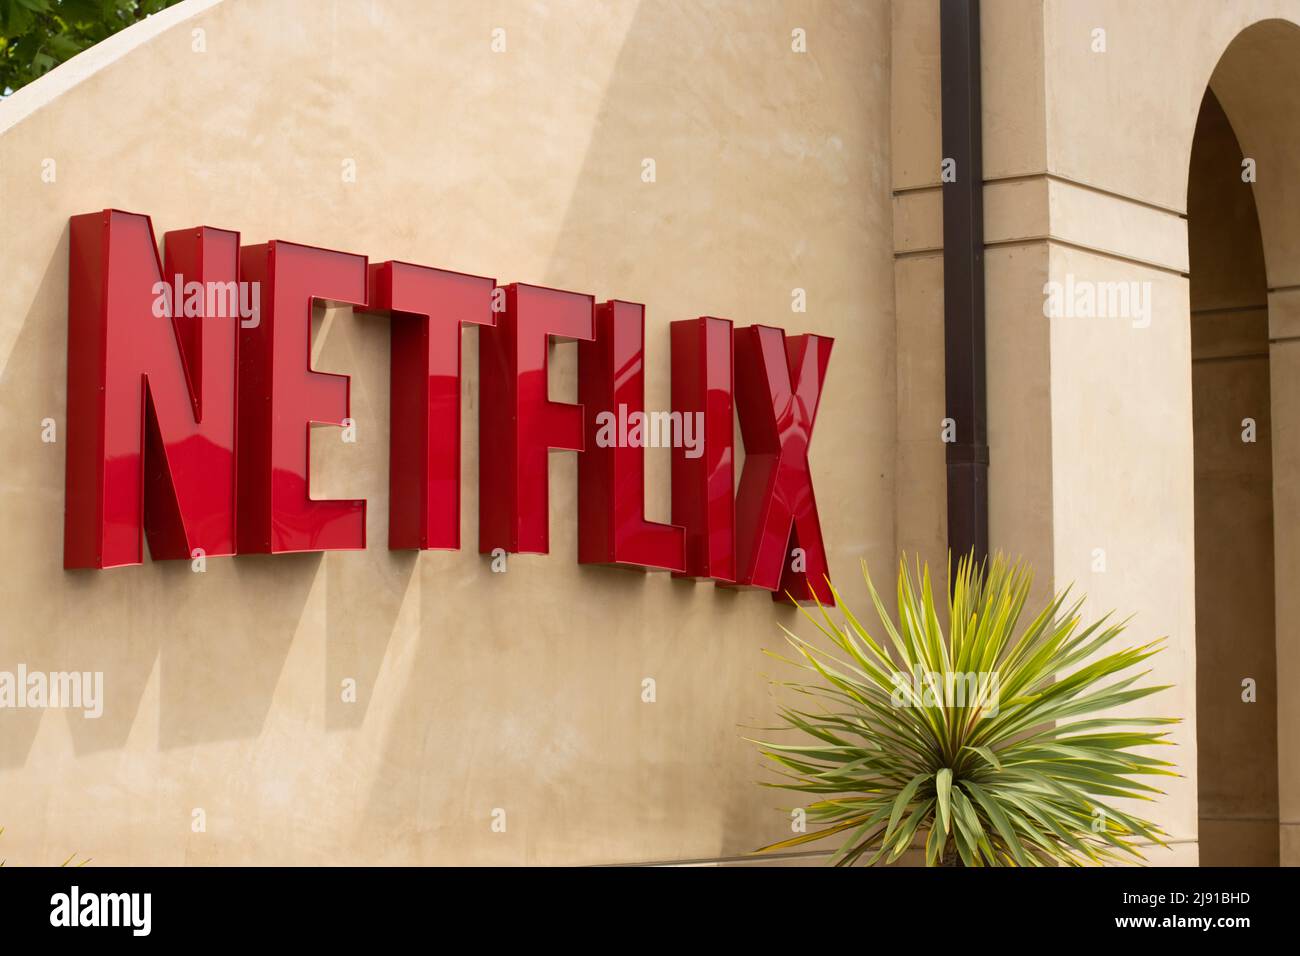 Netflix logo is seen at the main entrance to the Netflix headquarters in Los Gatos, California, on Thursday, May 5, 2022. Stock Photo